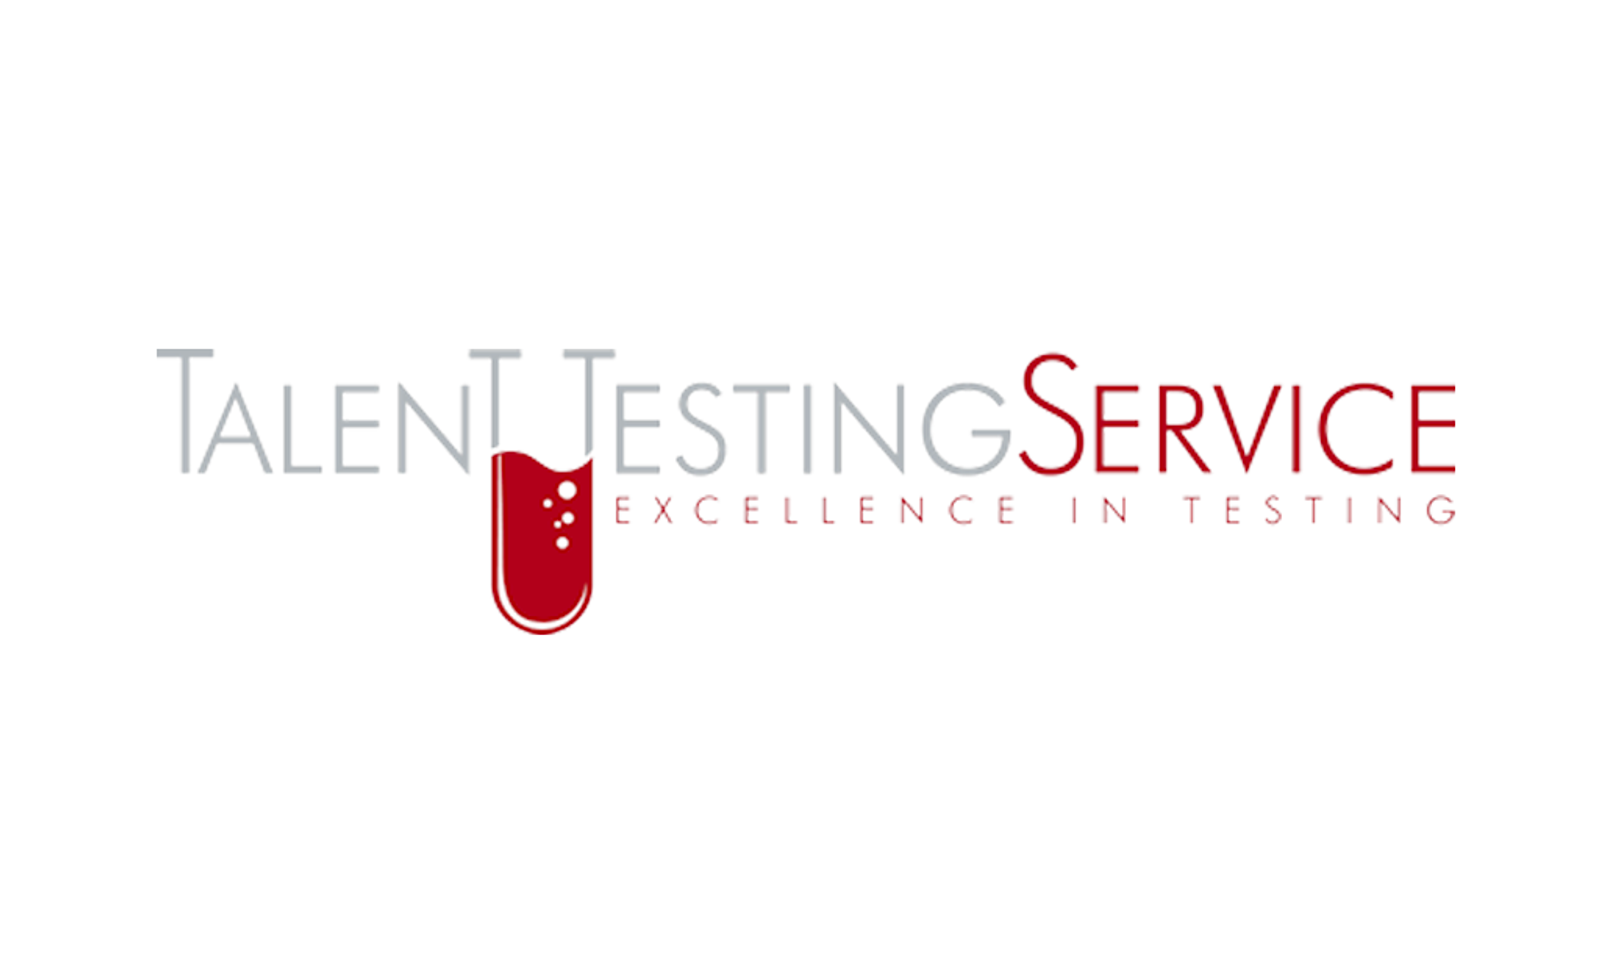 Talent Testing Service to Host COVID Testing Q&A Sessions Next Wk